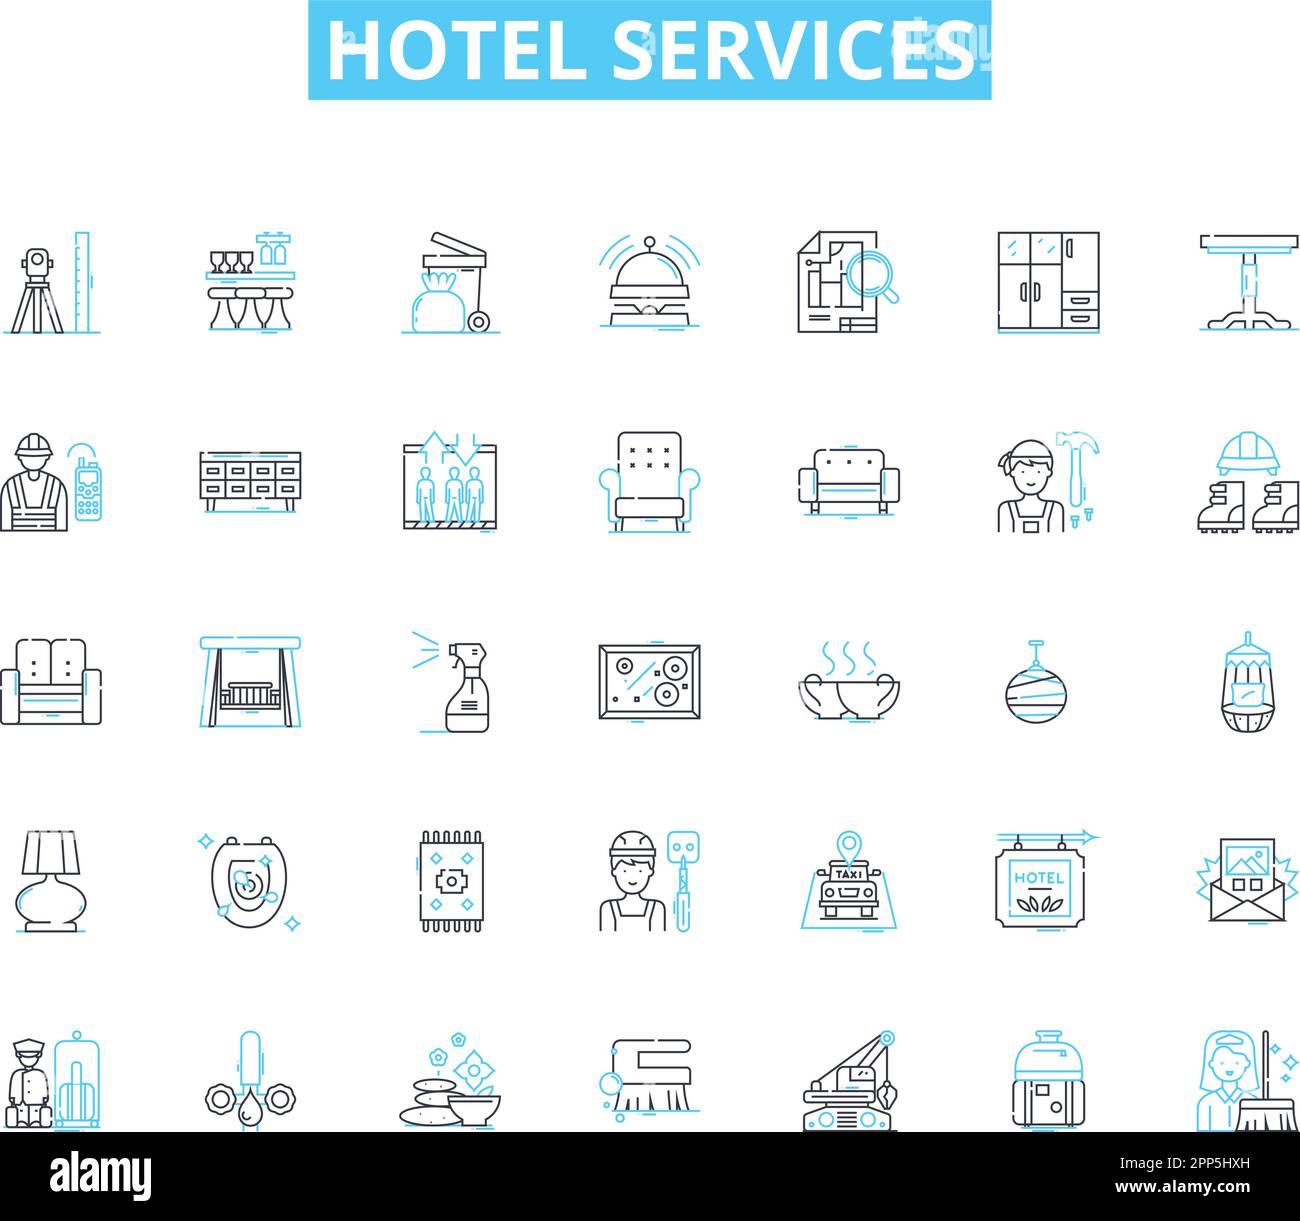 Hotel services linear icons set. ospitality, Accommodations, Amenities, Concierge, Room service, Housekeeping, Reception line vector and concept signs Stock Vector